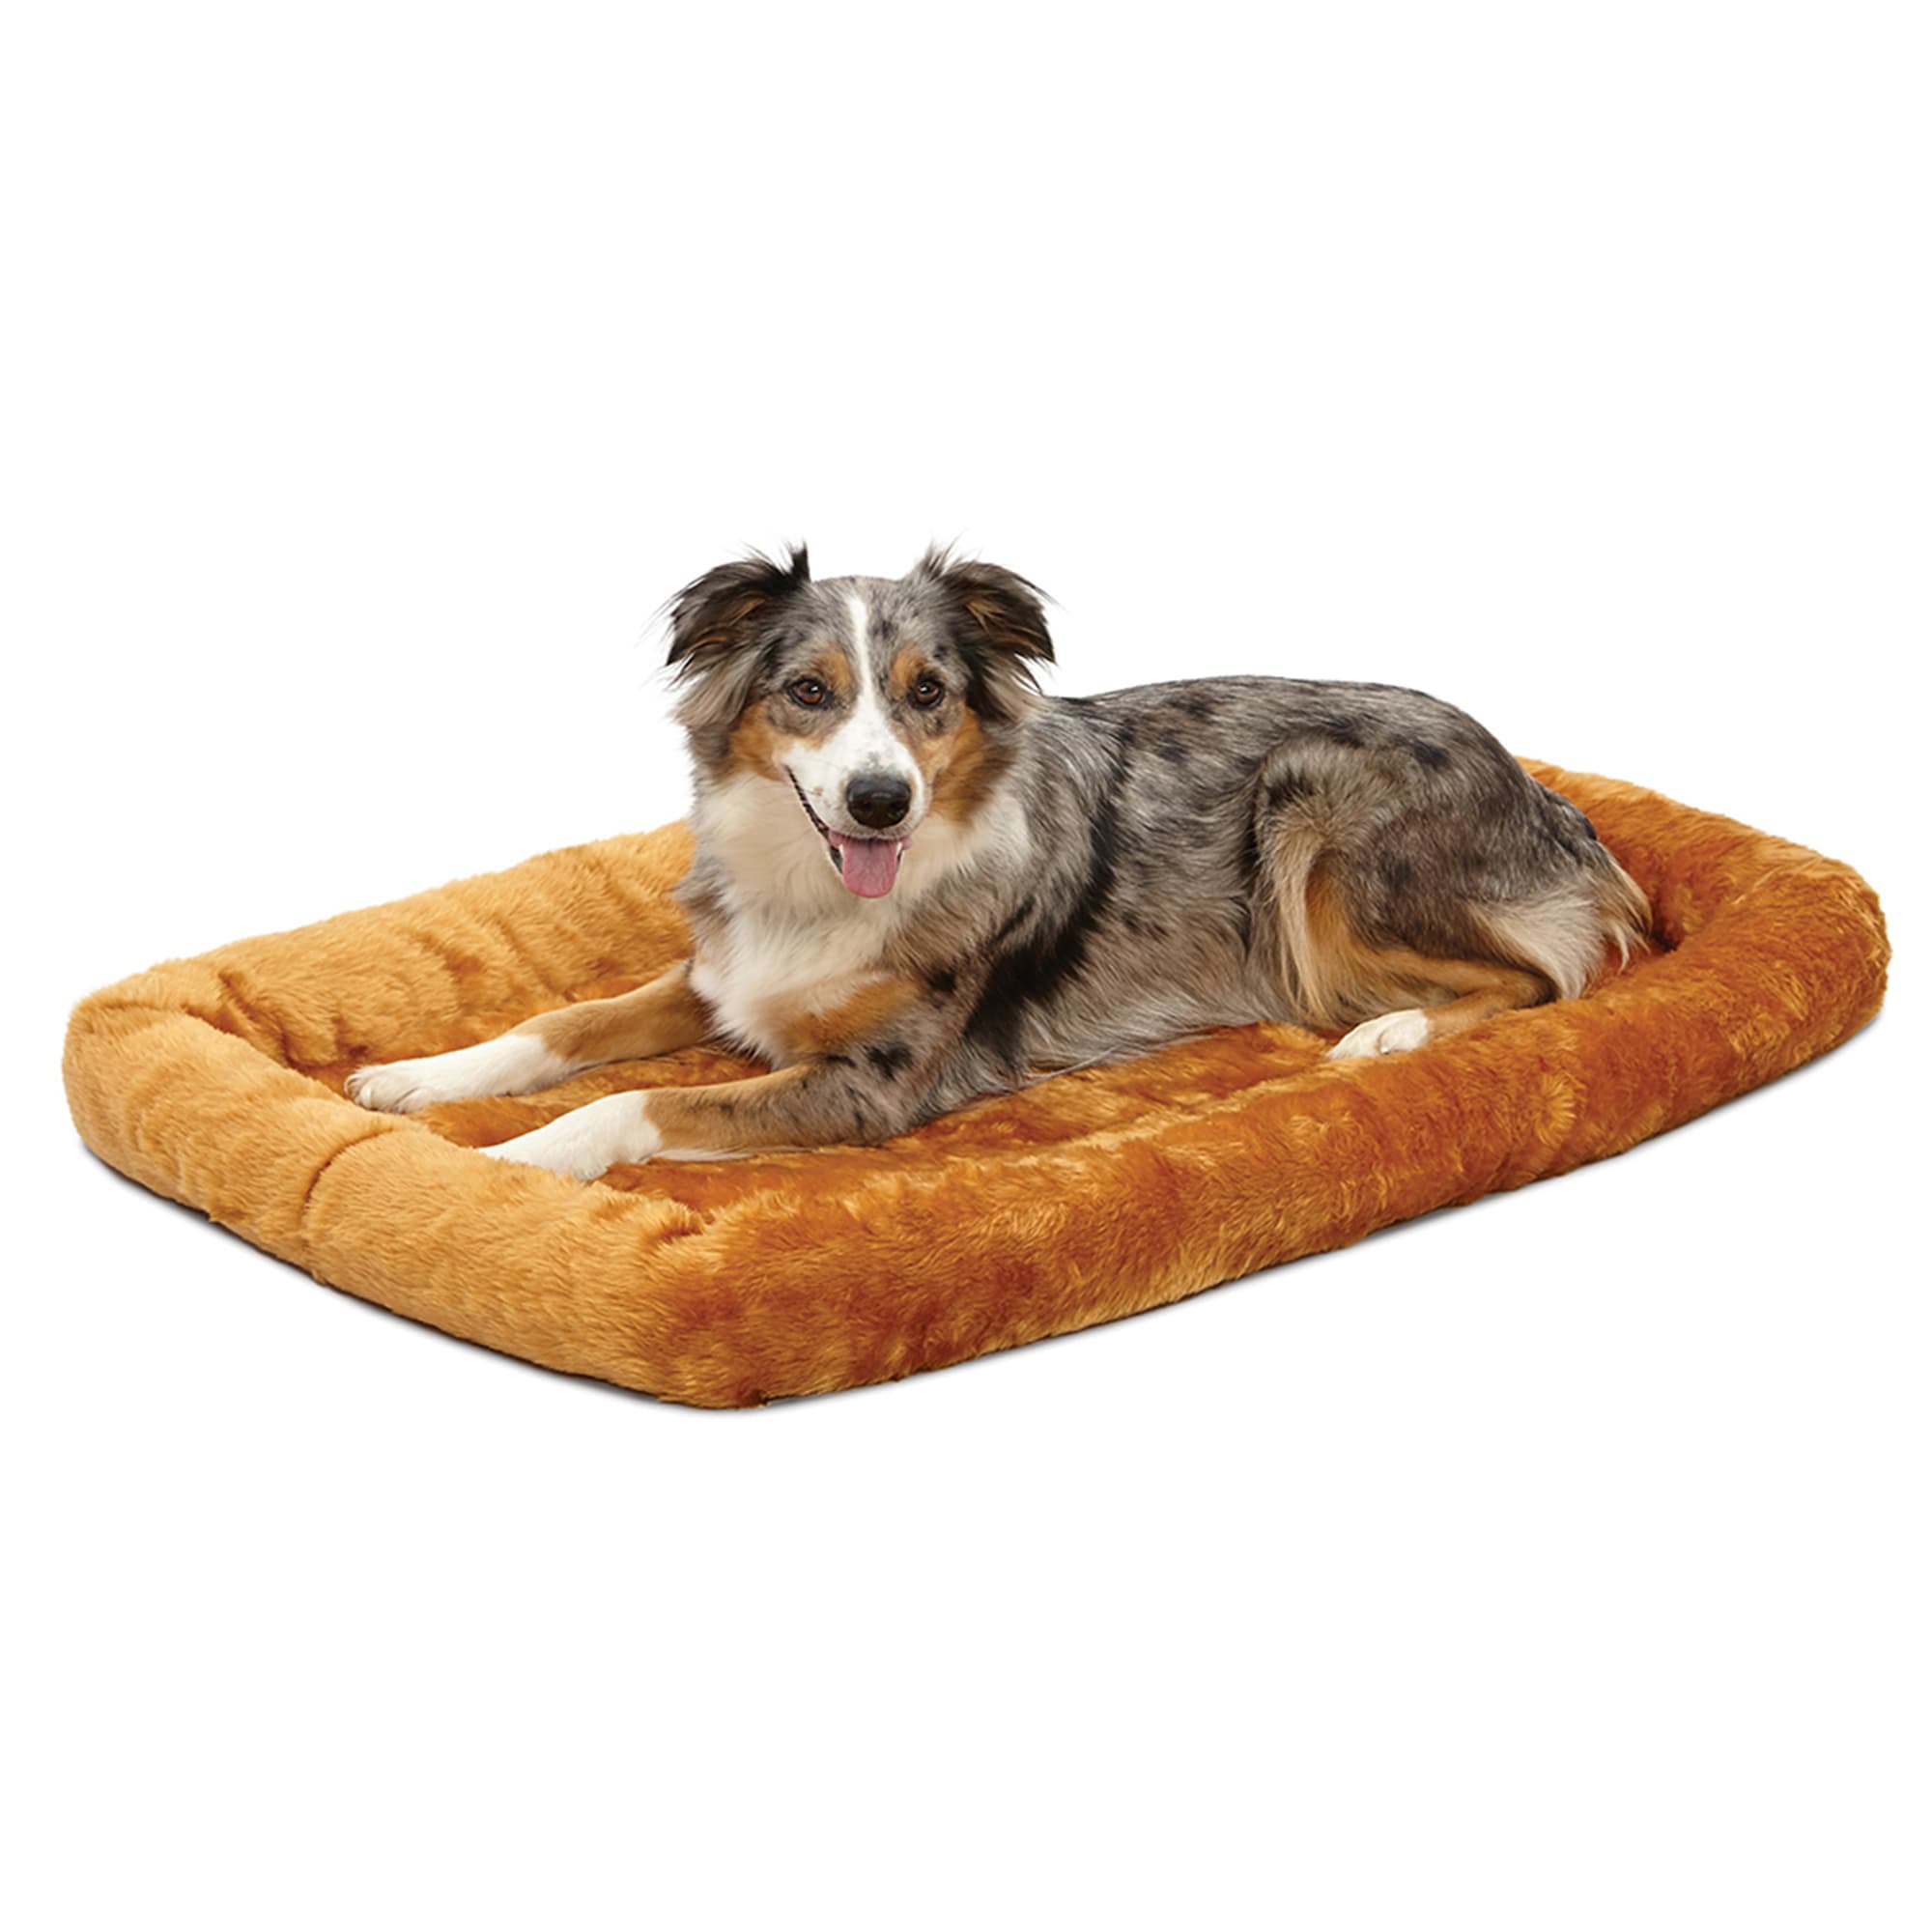 Photos - Dog Bed / Basket Midwest Quiet Time Bolster Cinnamon Dog Bed, 42" L X 26" W, X-Larg 